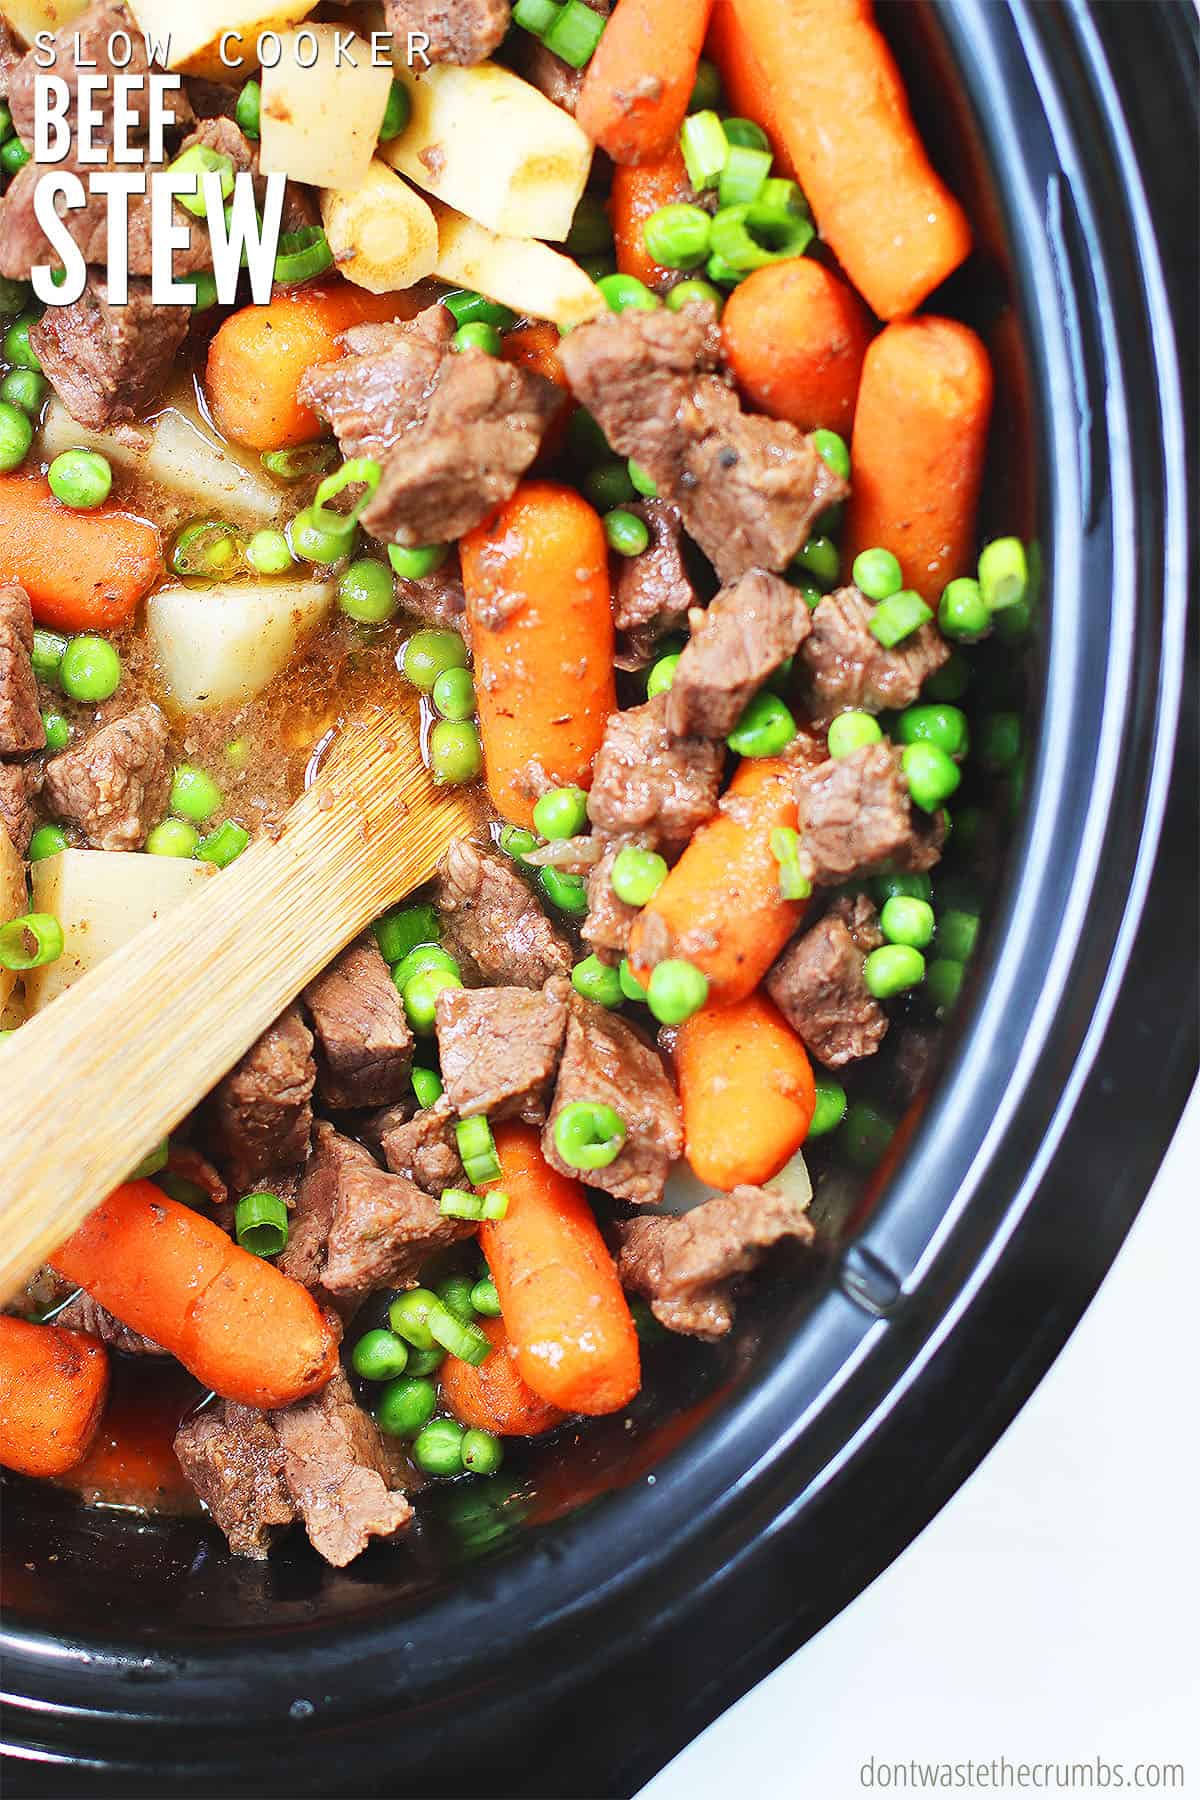 This slow cooker beef stew is tasty comfort food, especially for those cold nights. It's also great source of protein and fiber! Just dump and go! It's SO easy to make and loaded with flavor. Try my Instant Pot baked potatoes or my light and fluffy sweet potato biscuits as a side.